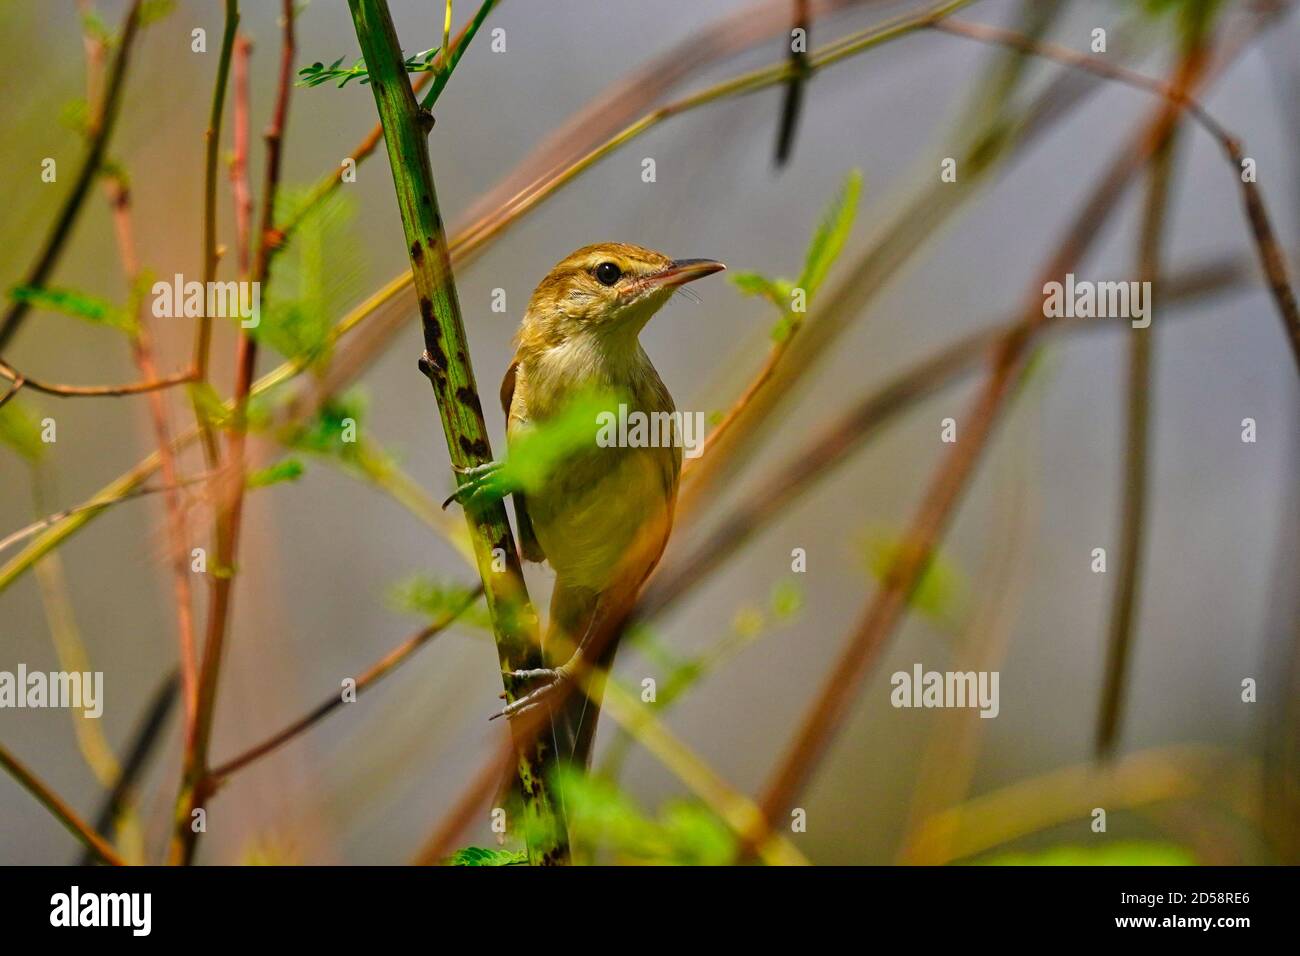 Close-up portrait of a bird on a stem, Sumbawa, Indonesia Stock Photo